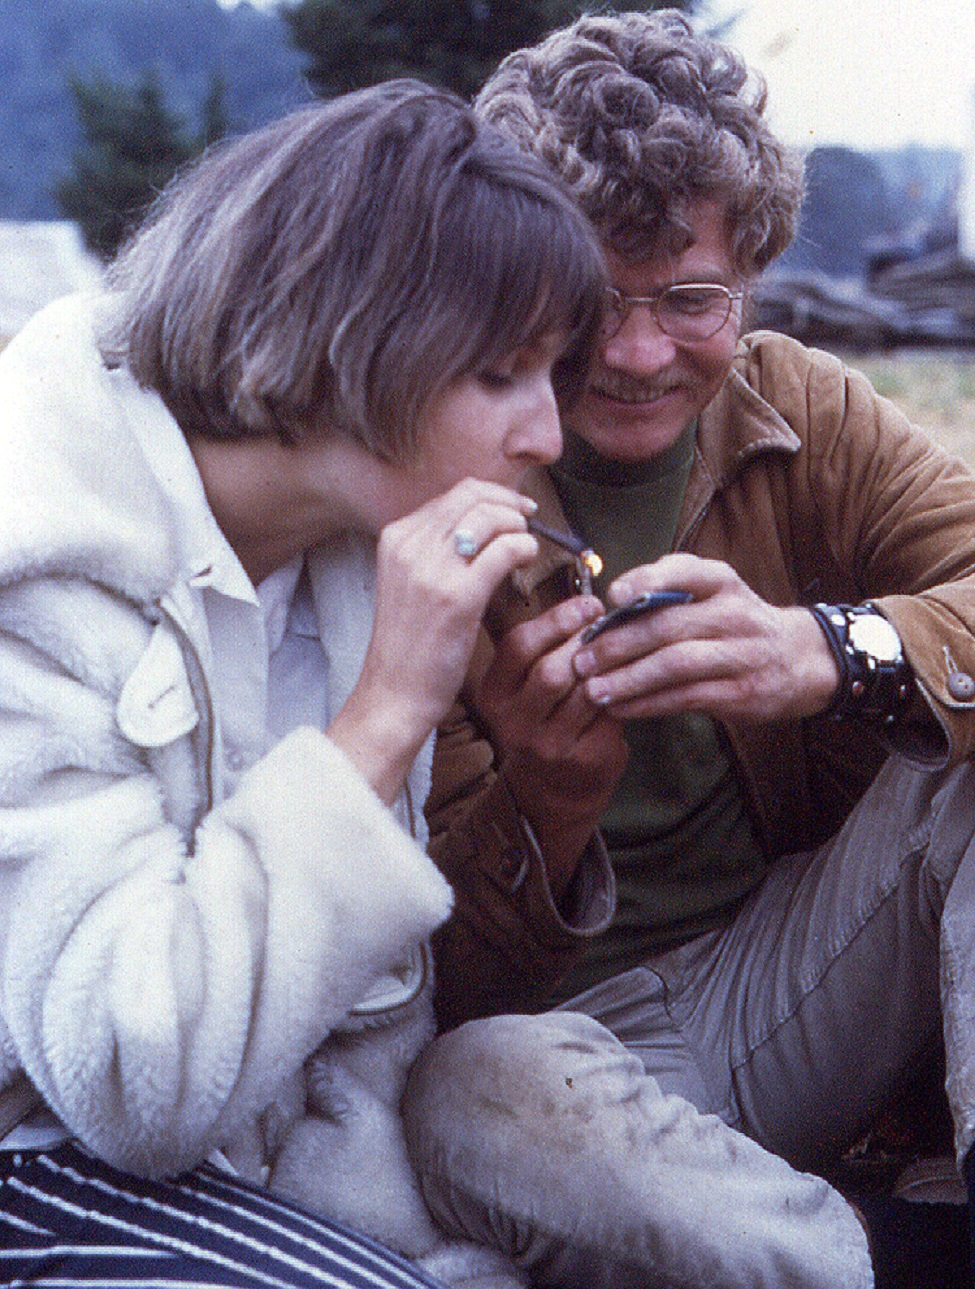 Smoking a Joint - Vortex 1 - 1970 - McIver State Park